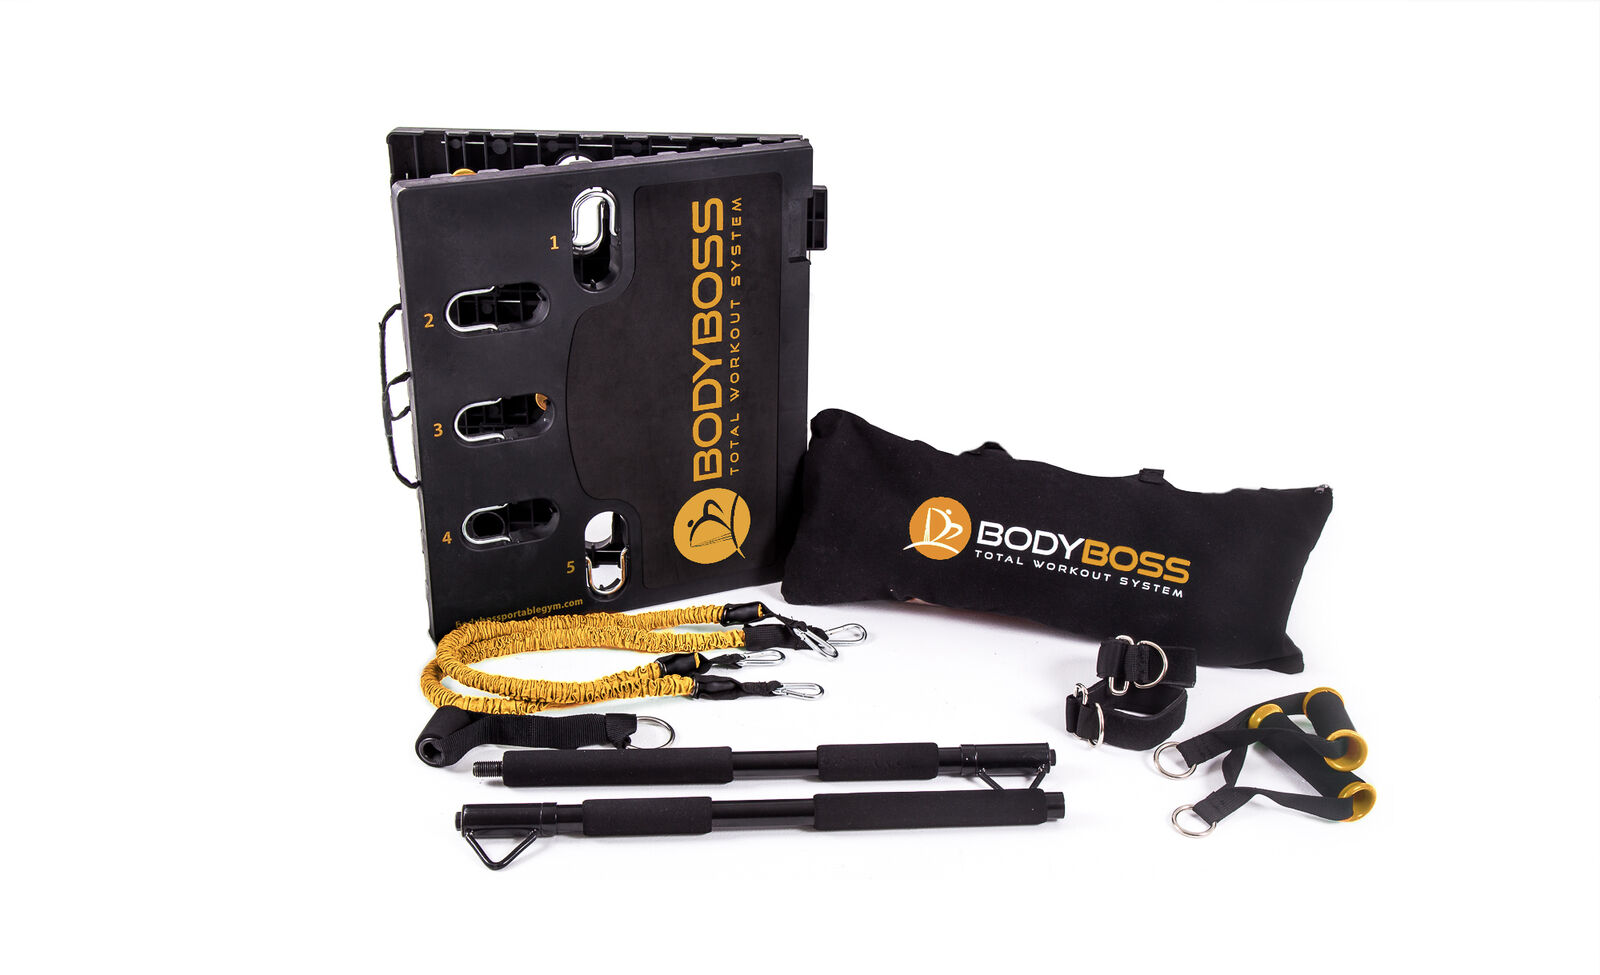 BodyBoss 2.0 - Full Portable Home Gym Workout Package